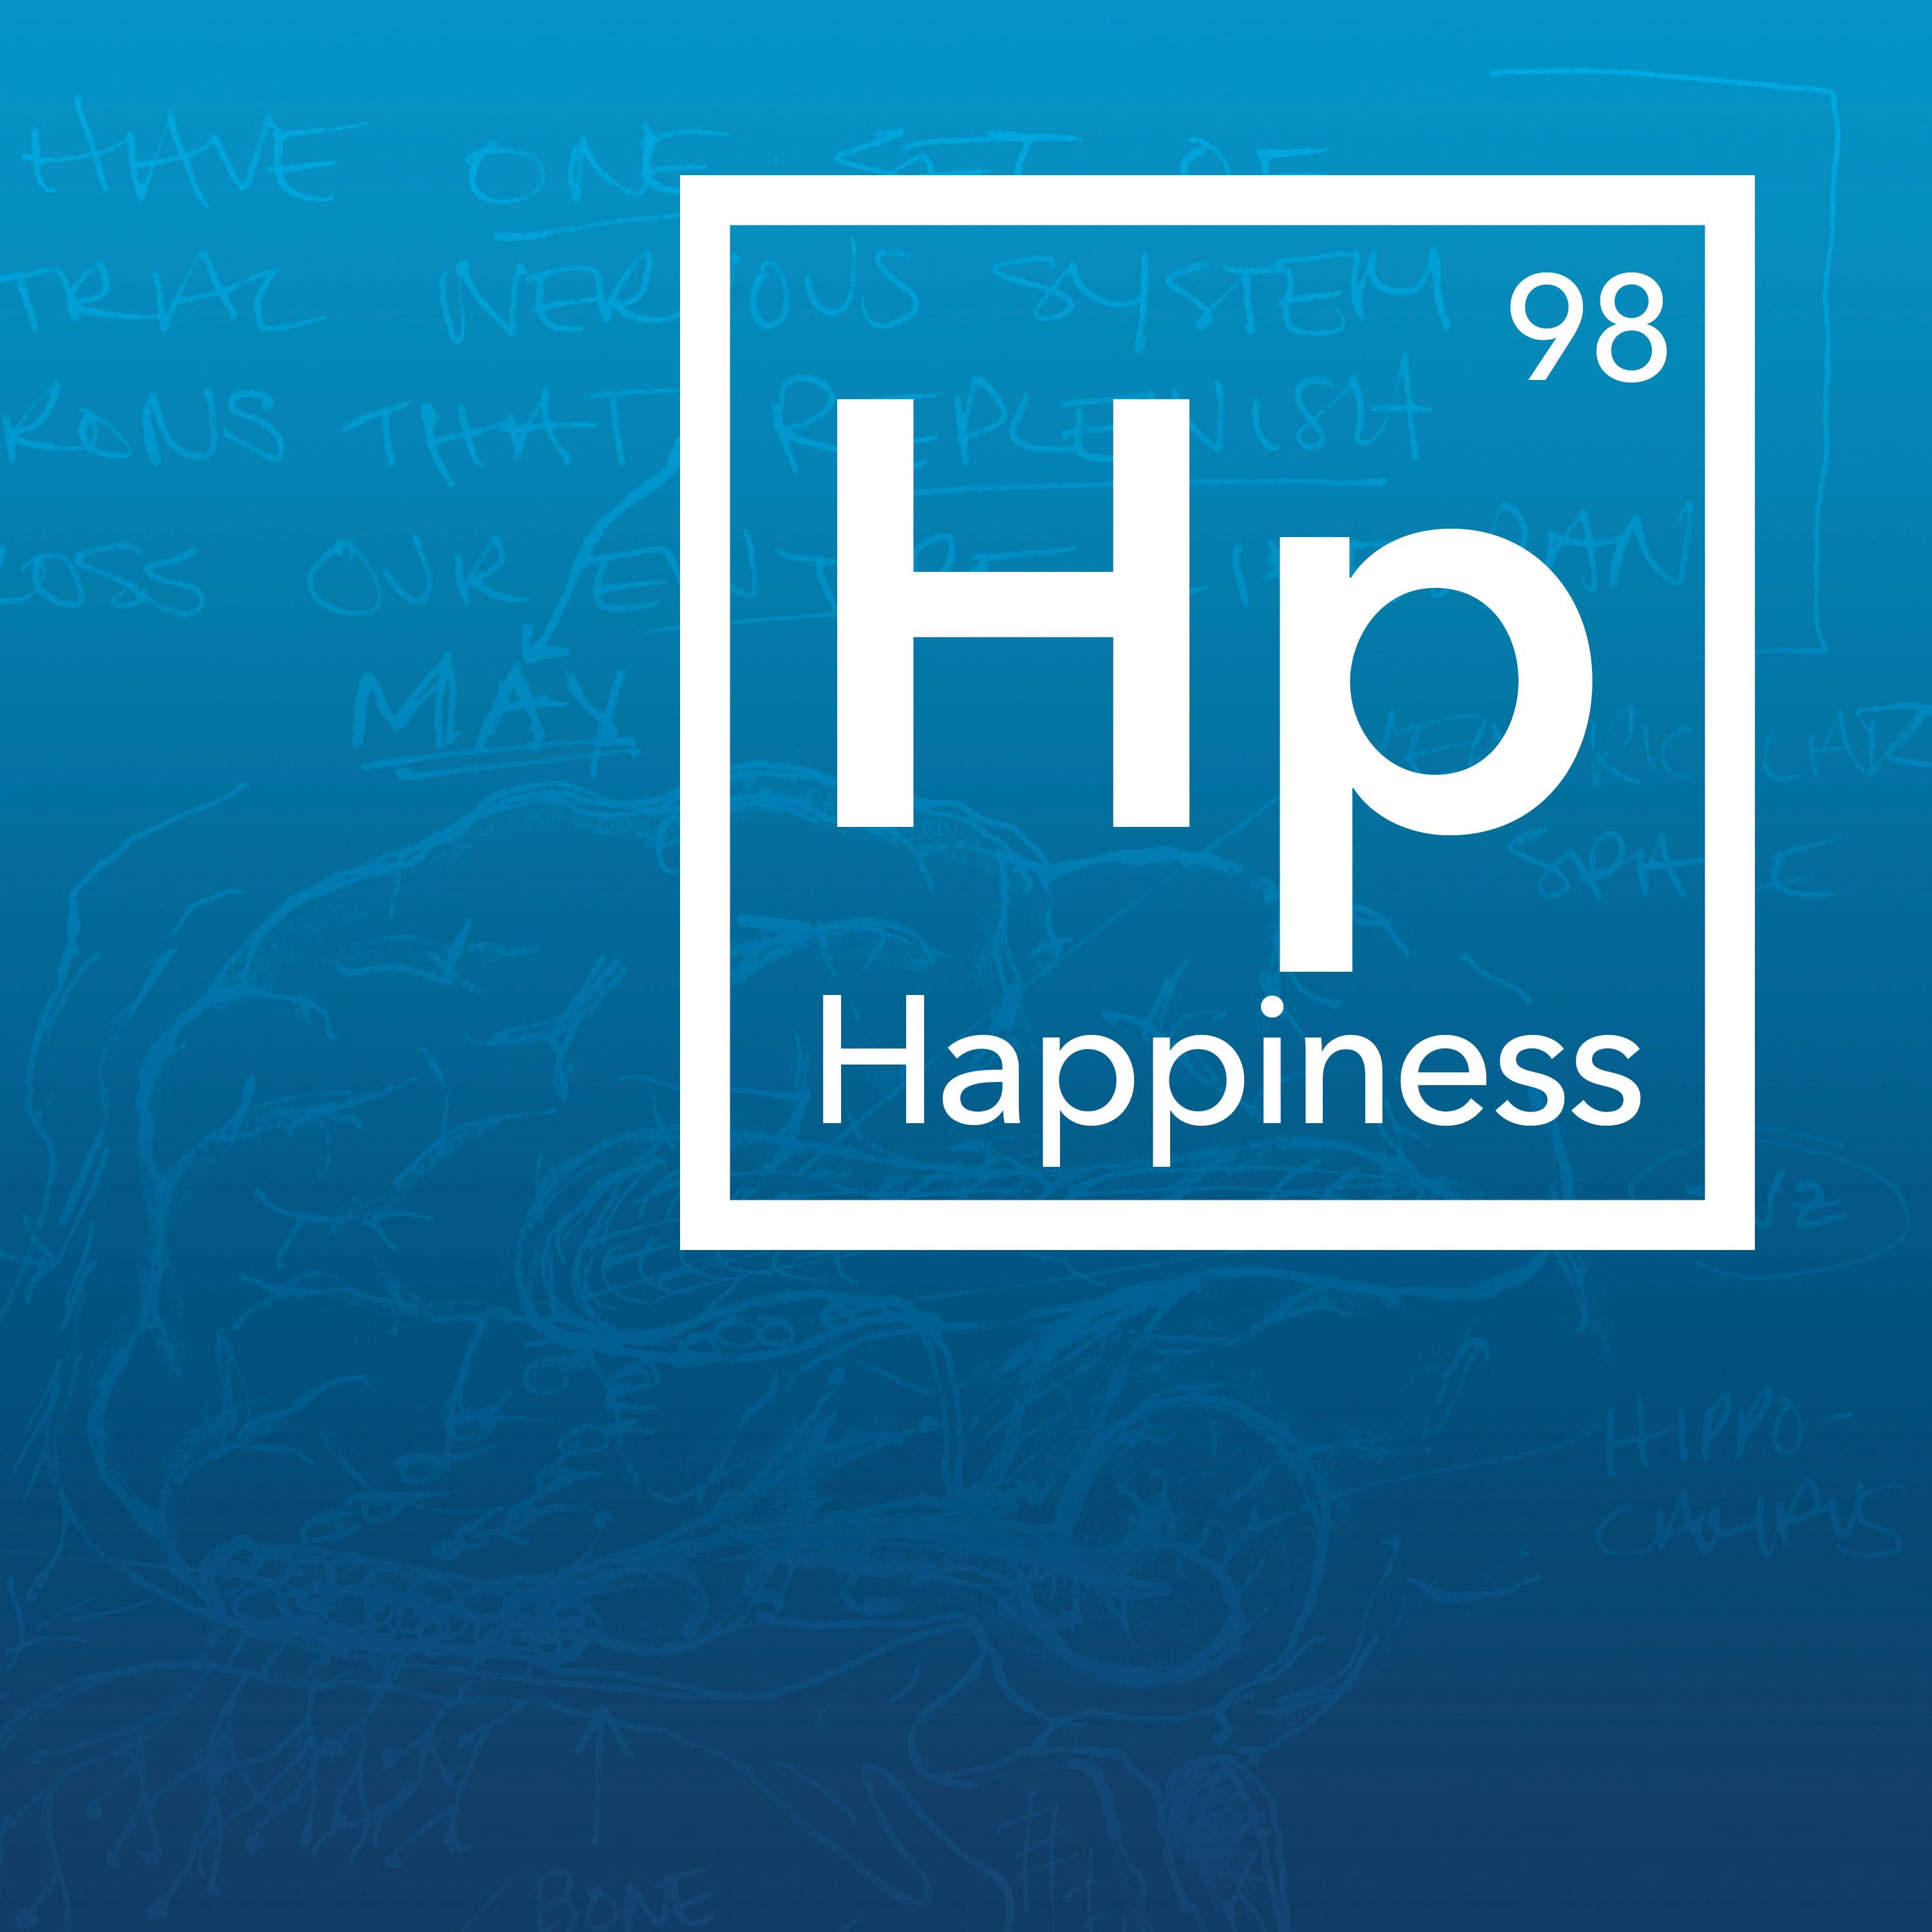 Science-Based Tools for Increasing Happiness 